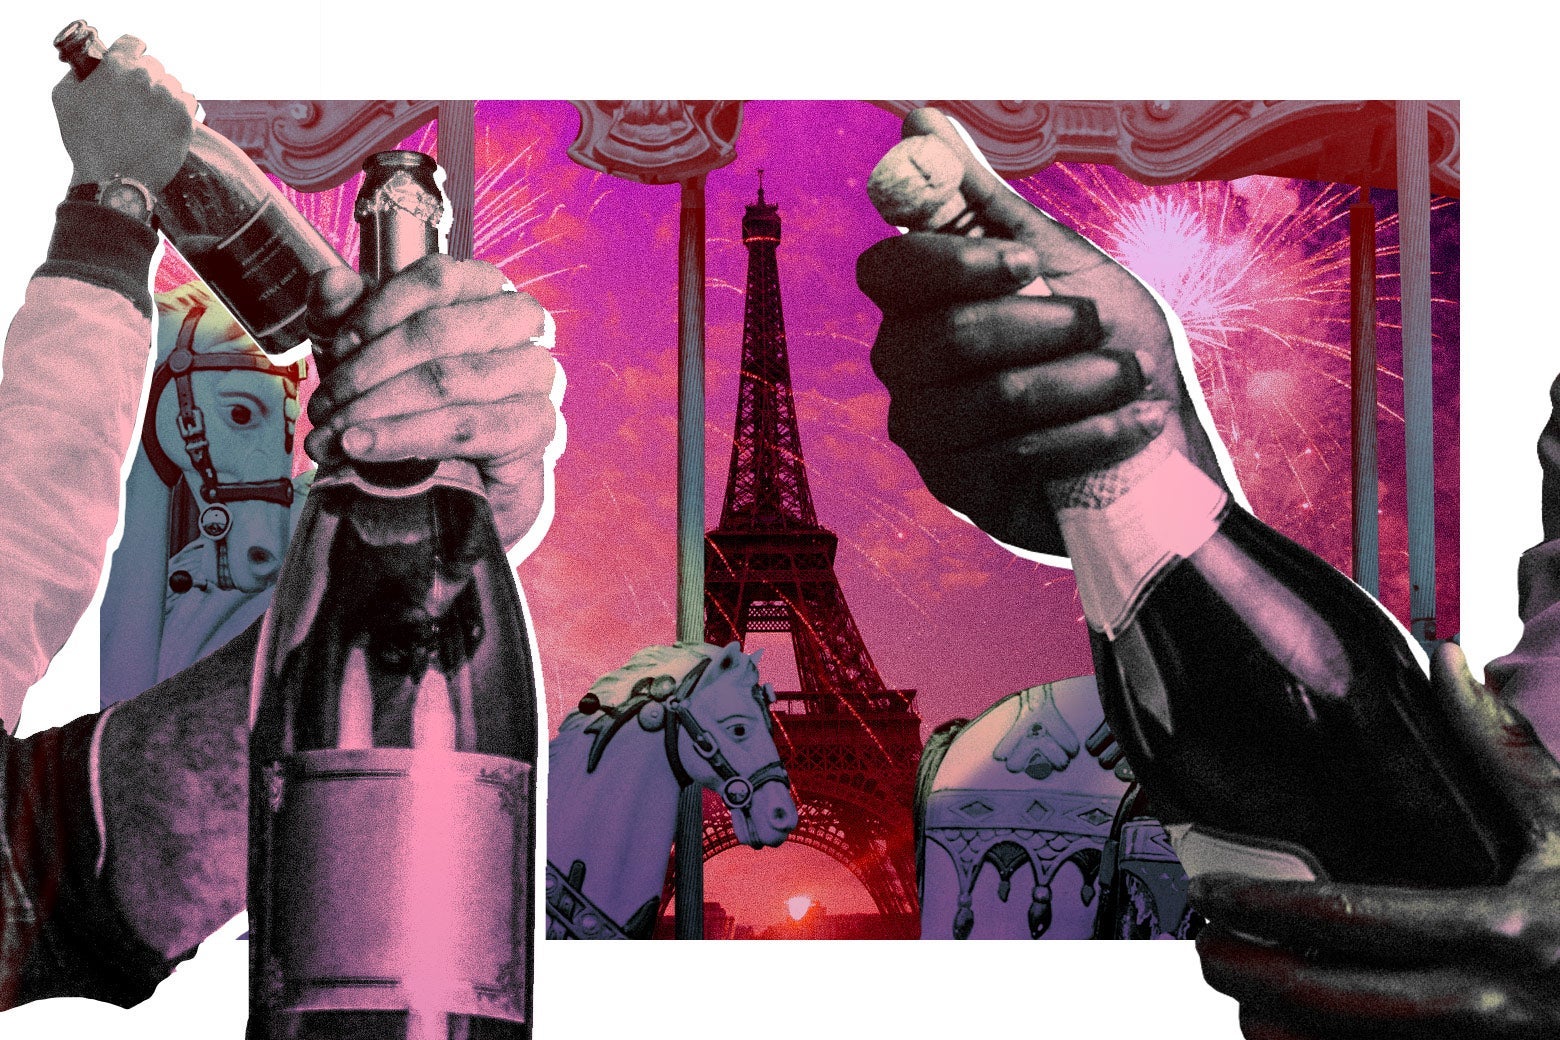 Hands hold Champagne bottles in front of a window that shows horses and the Eiffel Tower.